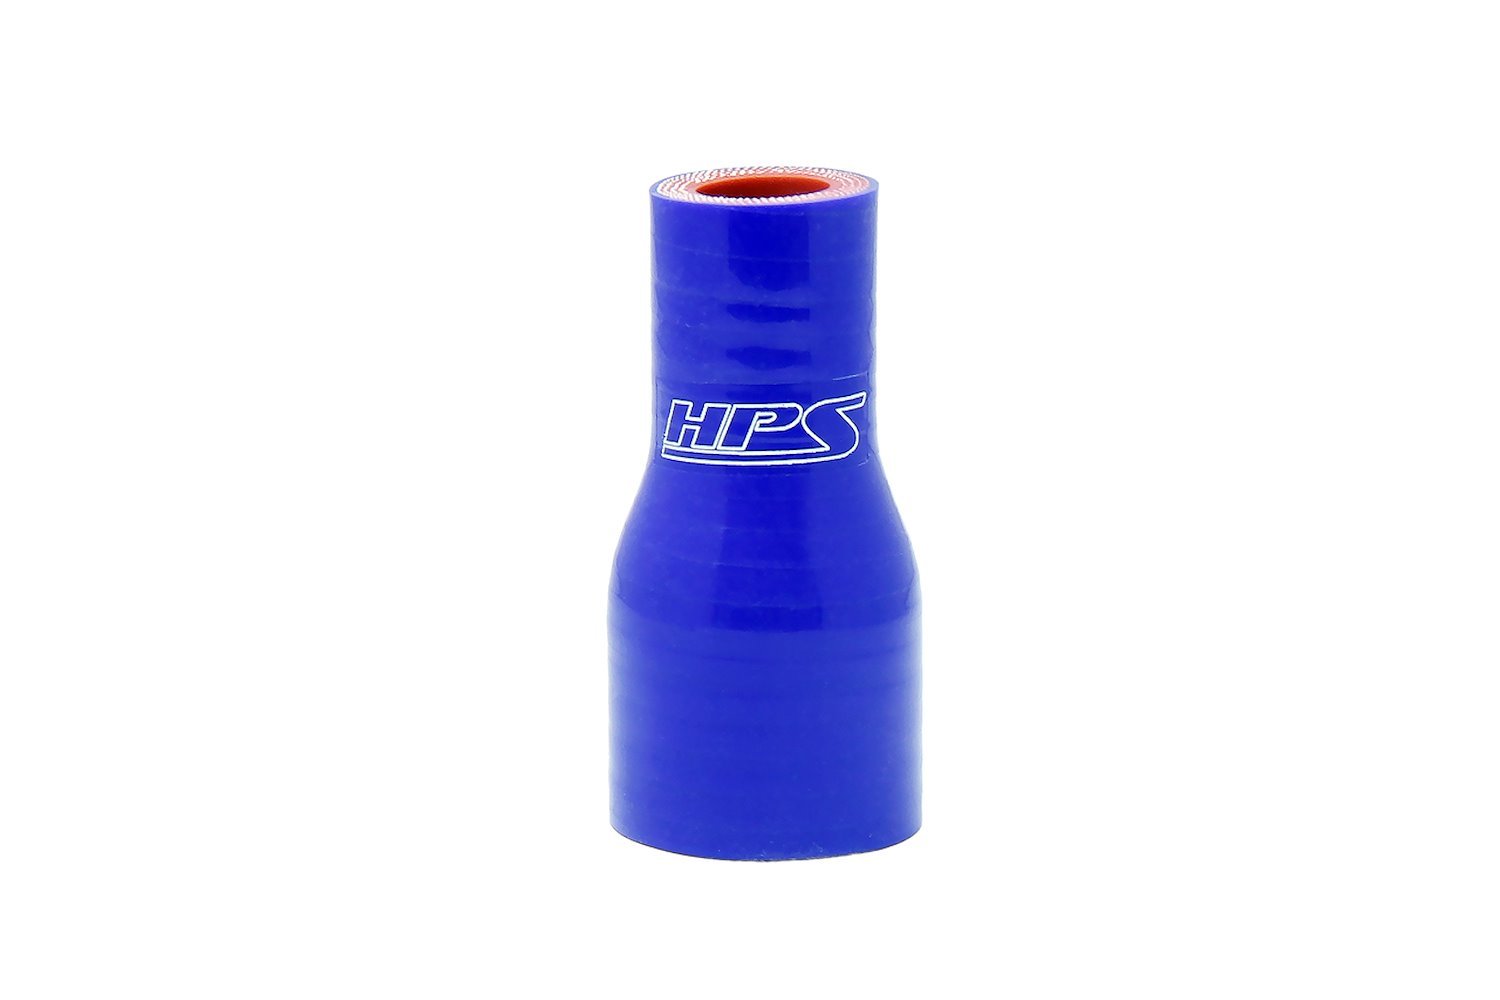 HTSR-050-062-BLUE Silicone Reducer Hose, High-Temp 4-Ply Reinforced, 1/2 in. - 5/8 in. ID, 3 in. Long, Blue